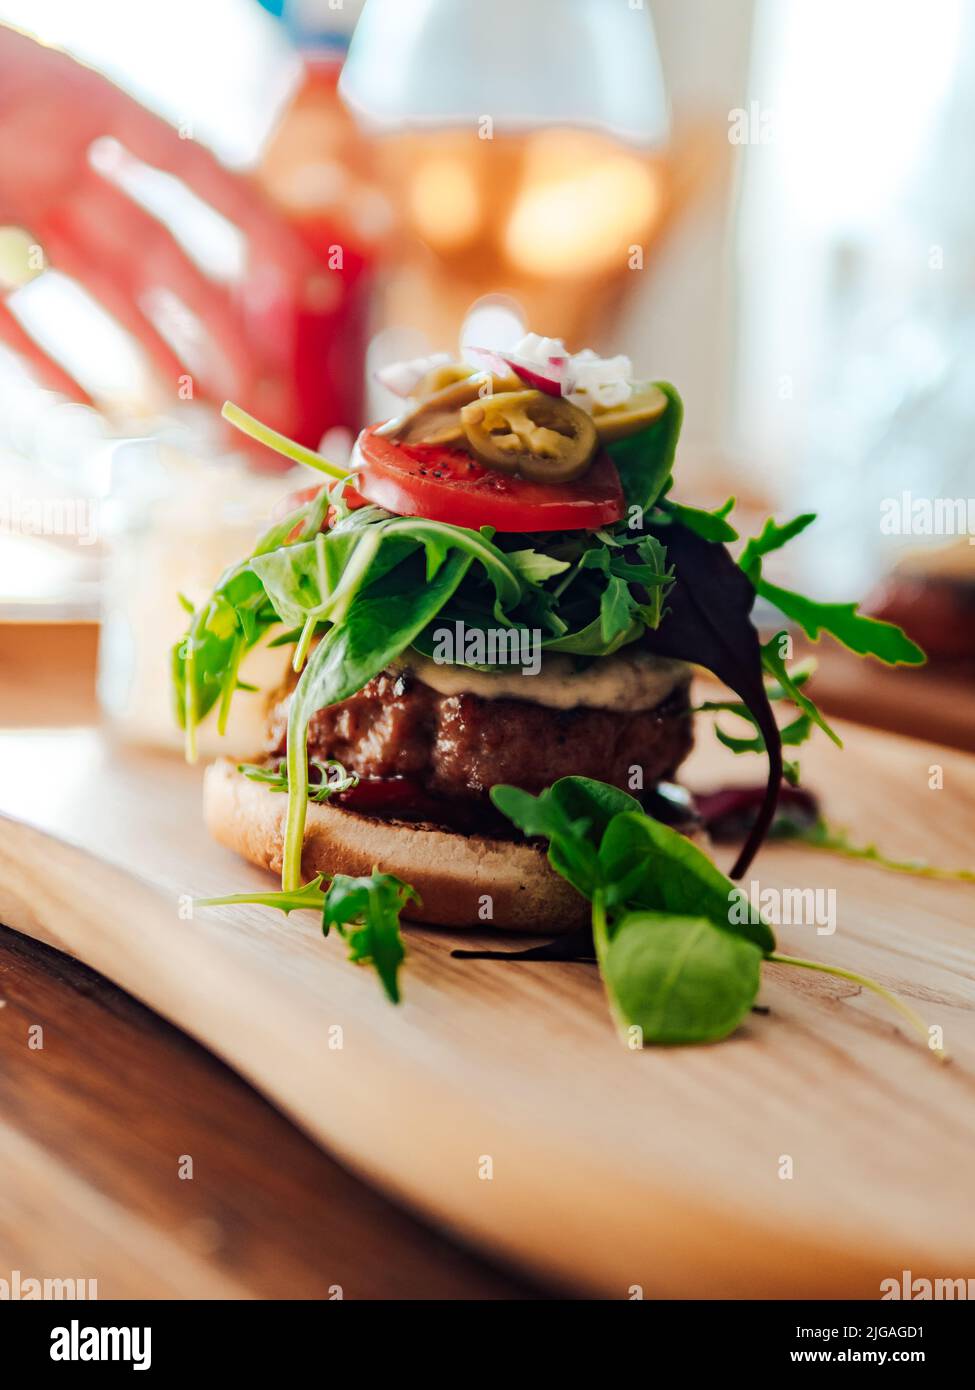 A yummy burger with meat, salad and other ingredients on a wooden surface Stock Photo